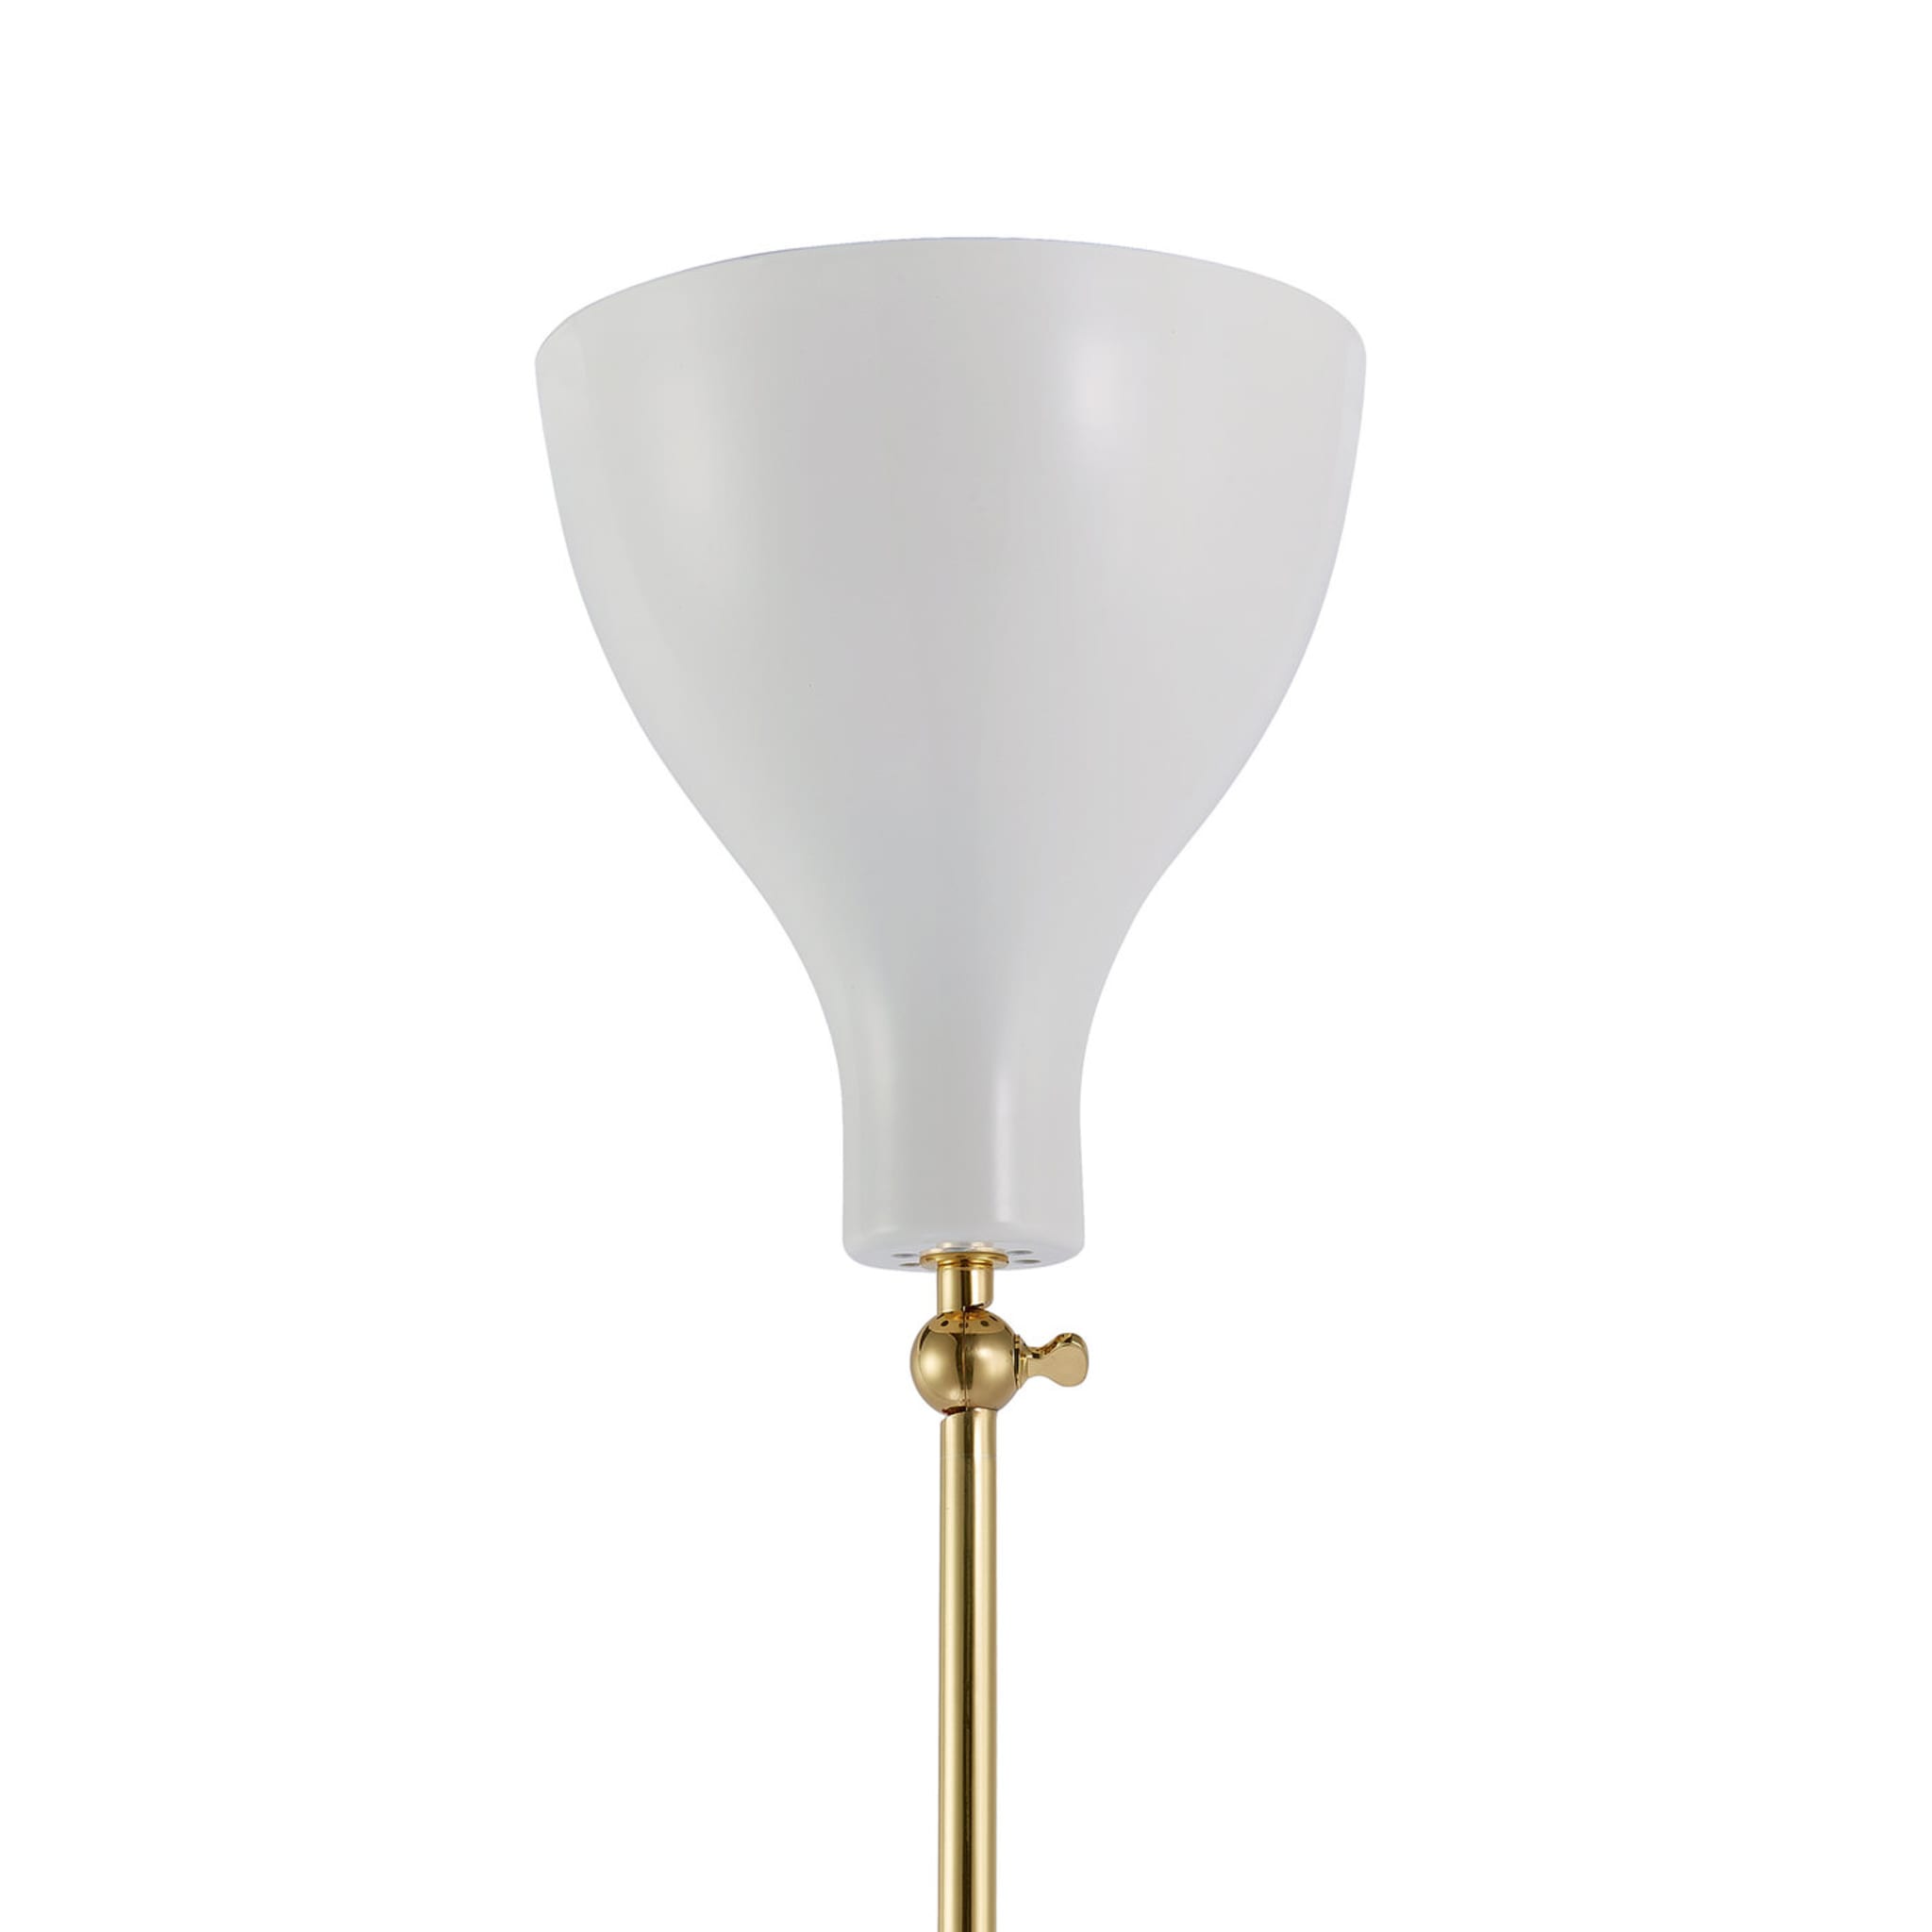 Lady V Black and White Tall Floor Lamp in Brass - Alternative view 1